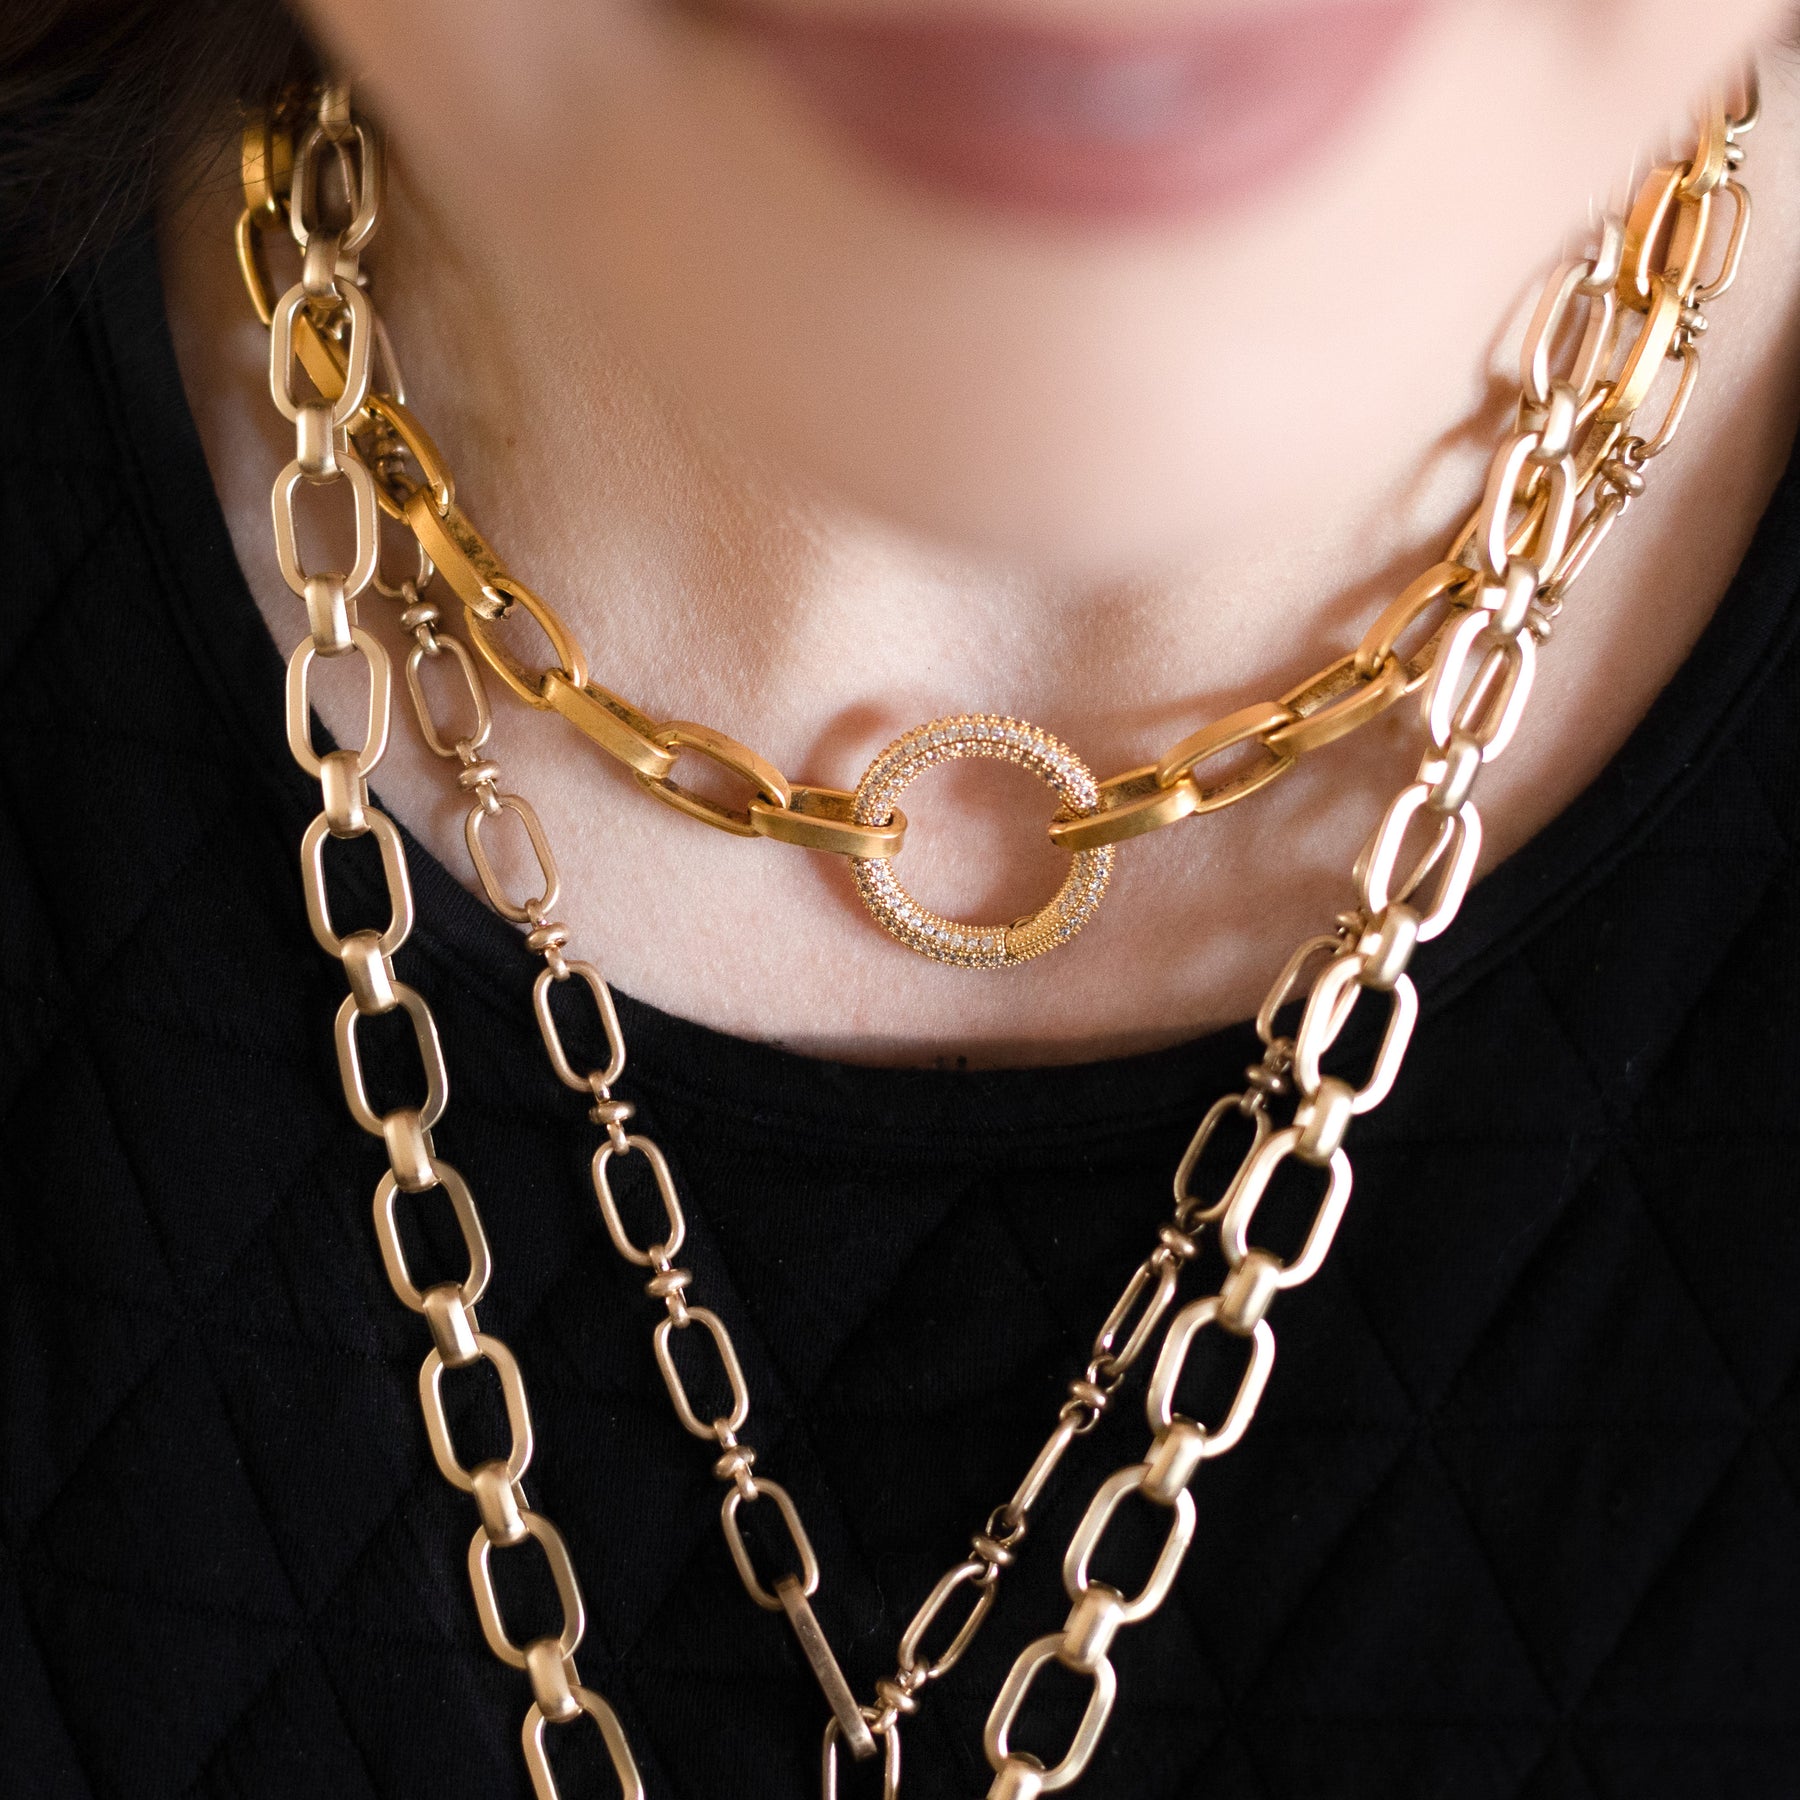 Chunky Matte Gold Necklace with Silver Carabiner – Loni Paul Jewelry